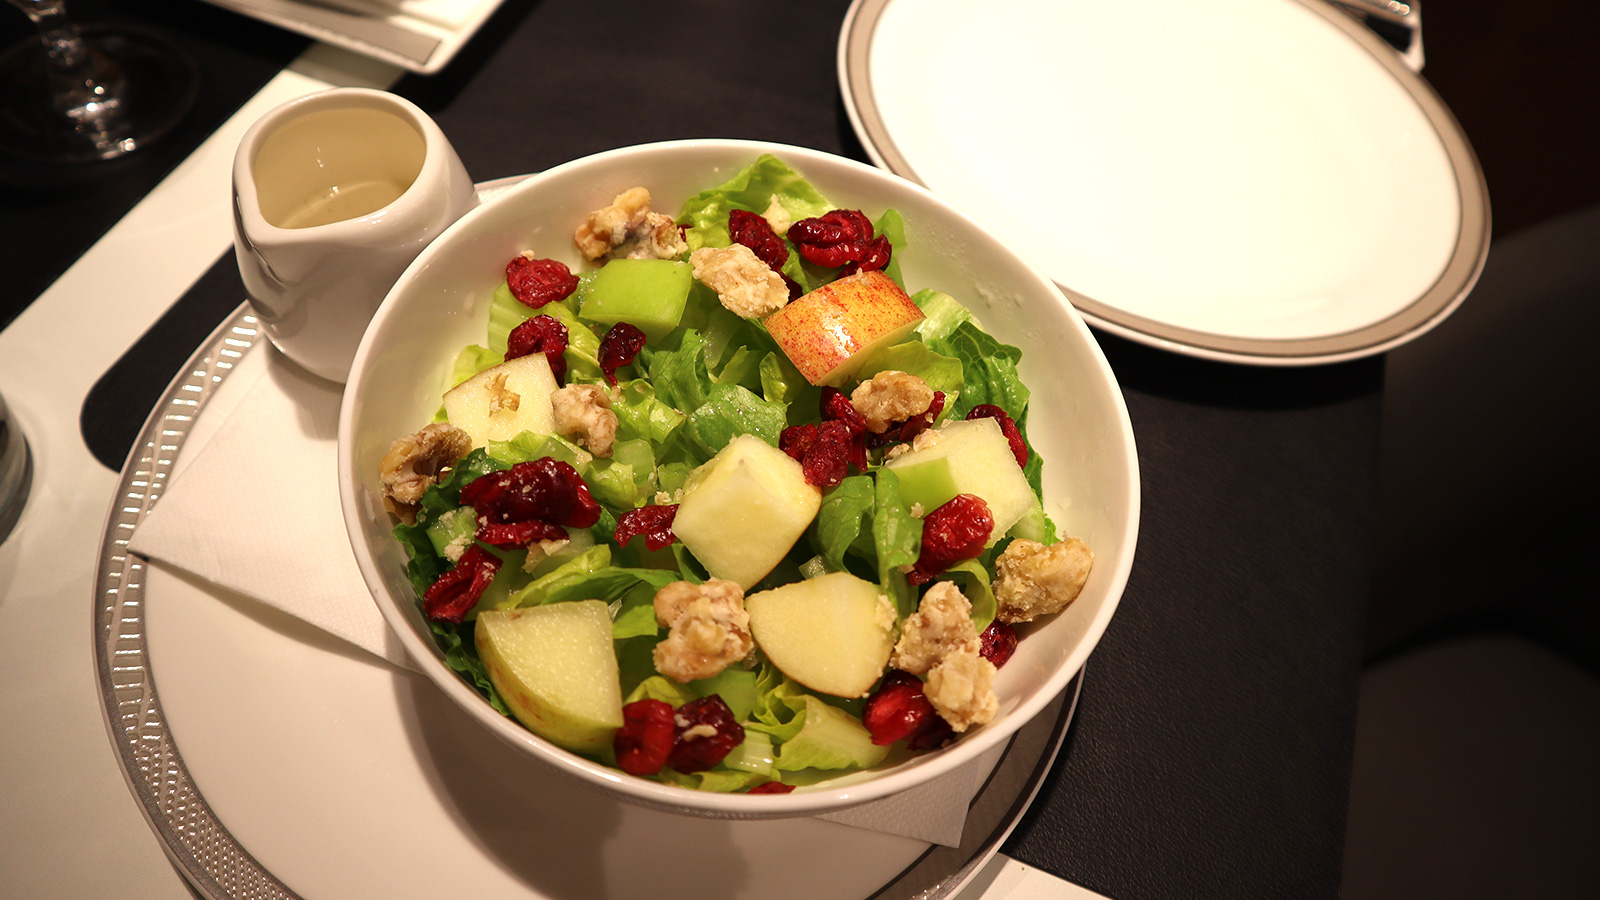 Waldorf salad in the Singapore Airlines SilverKris First Class Lounge, Melbourne